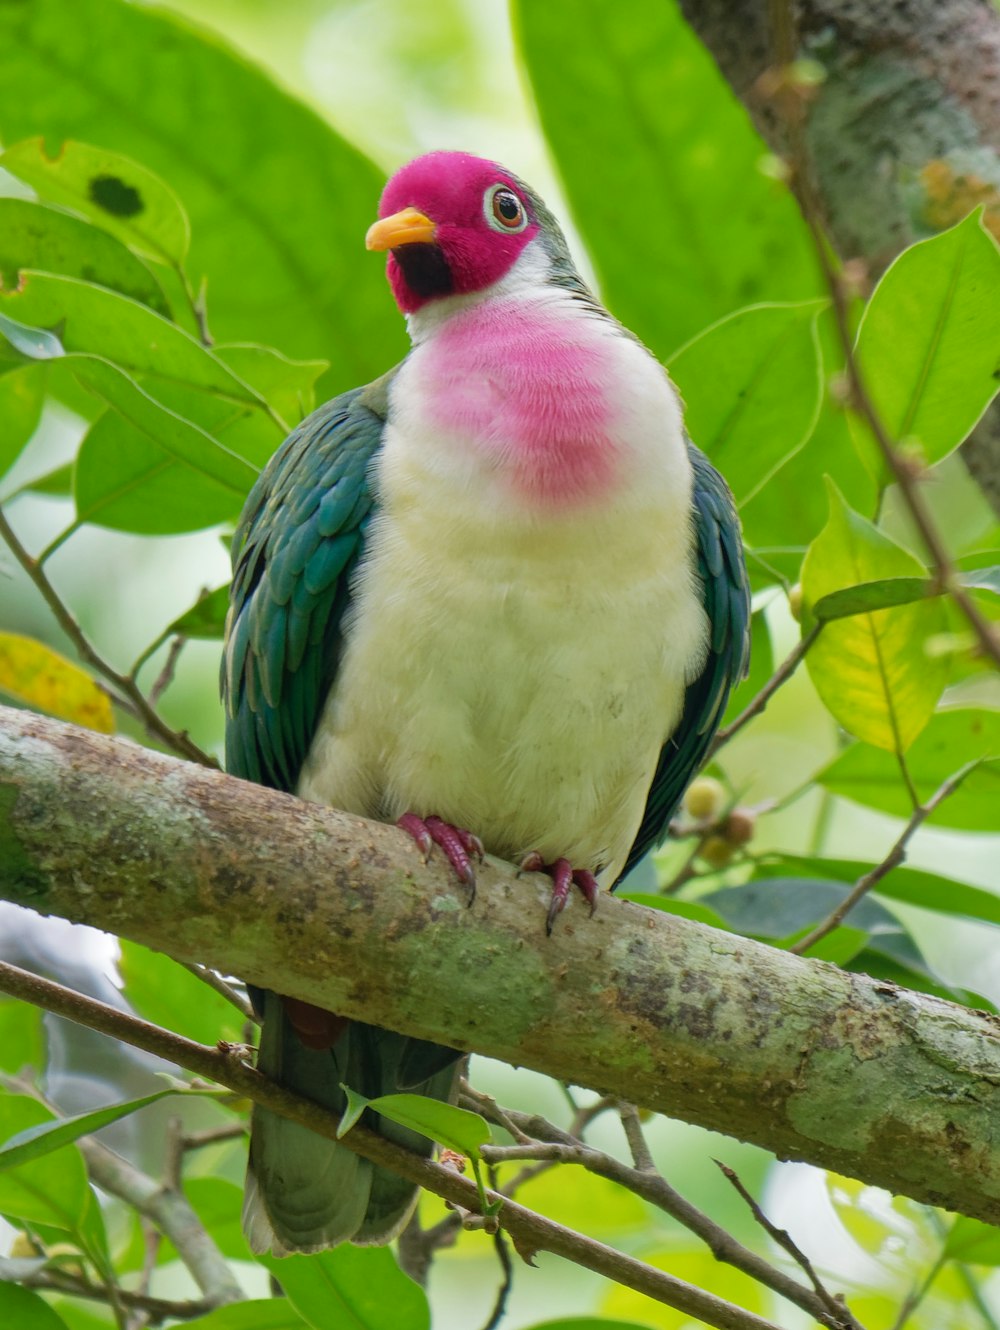 white, blue, and pink bird on the tree trunk photograph